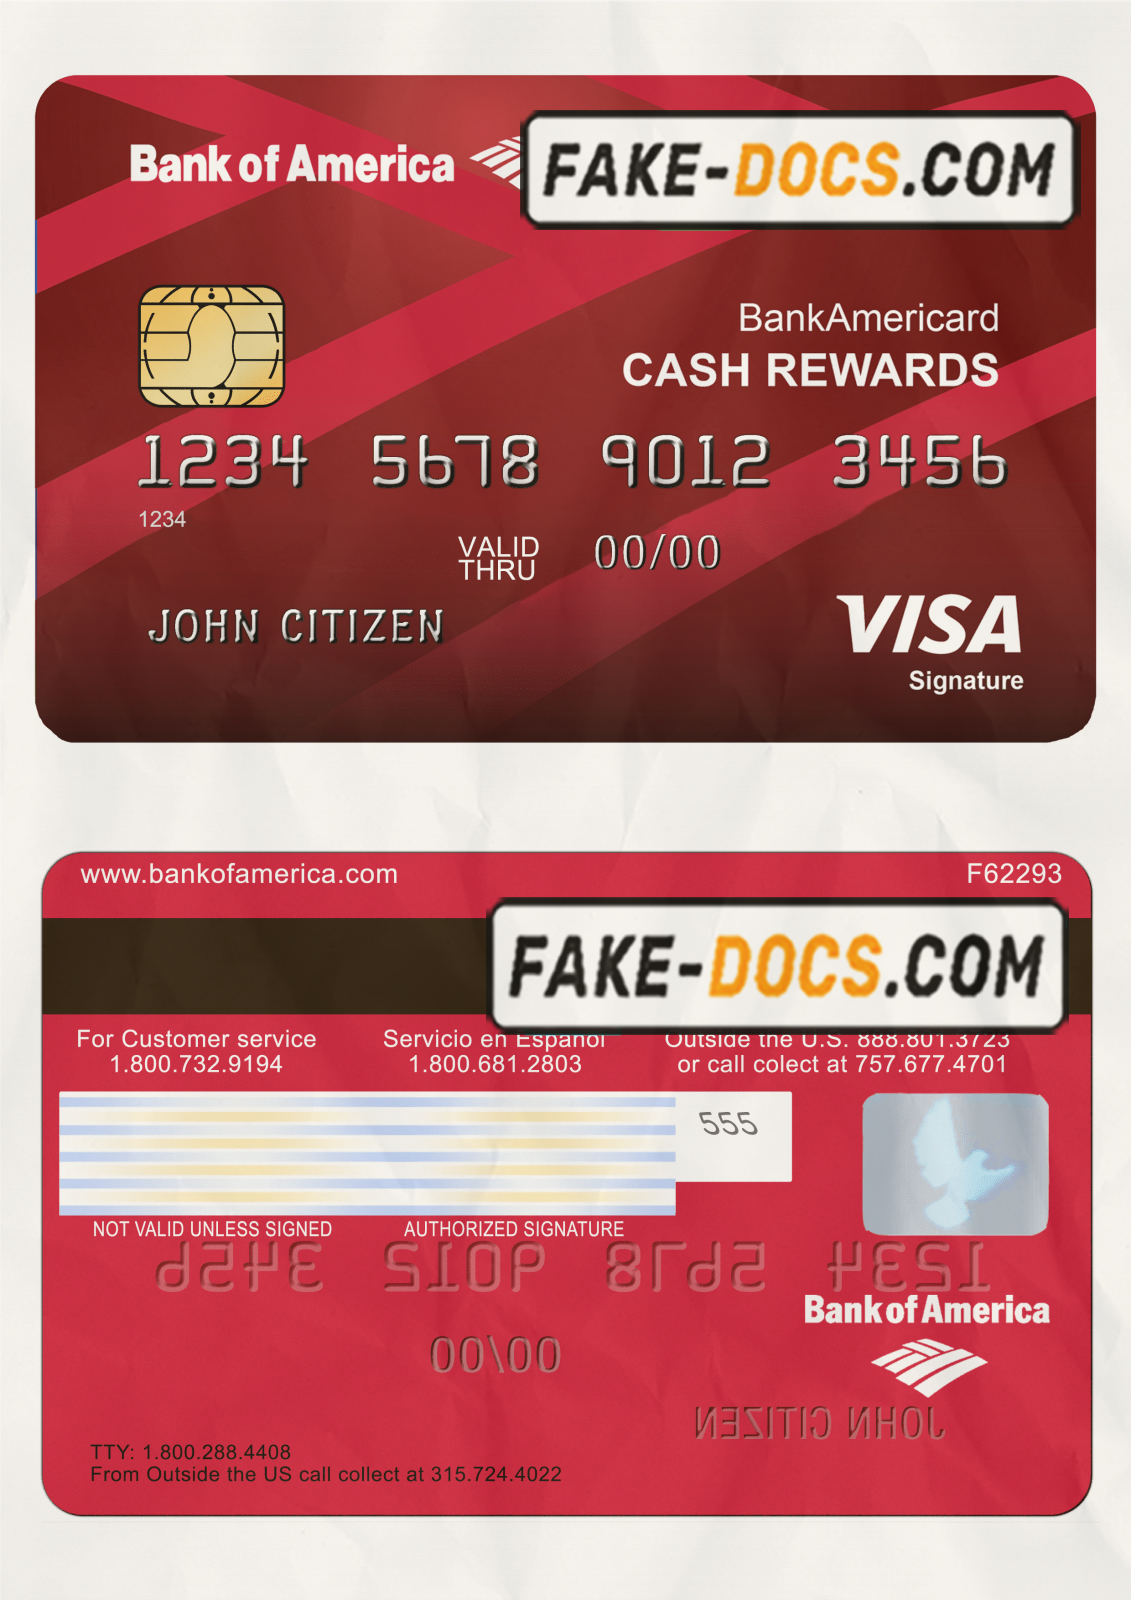 USA Bank of America Visa Card template in PSD format, fully editable scan